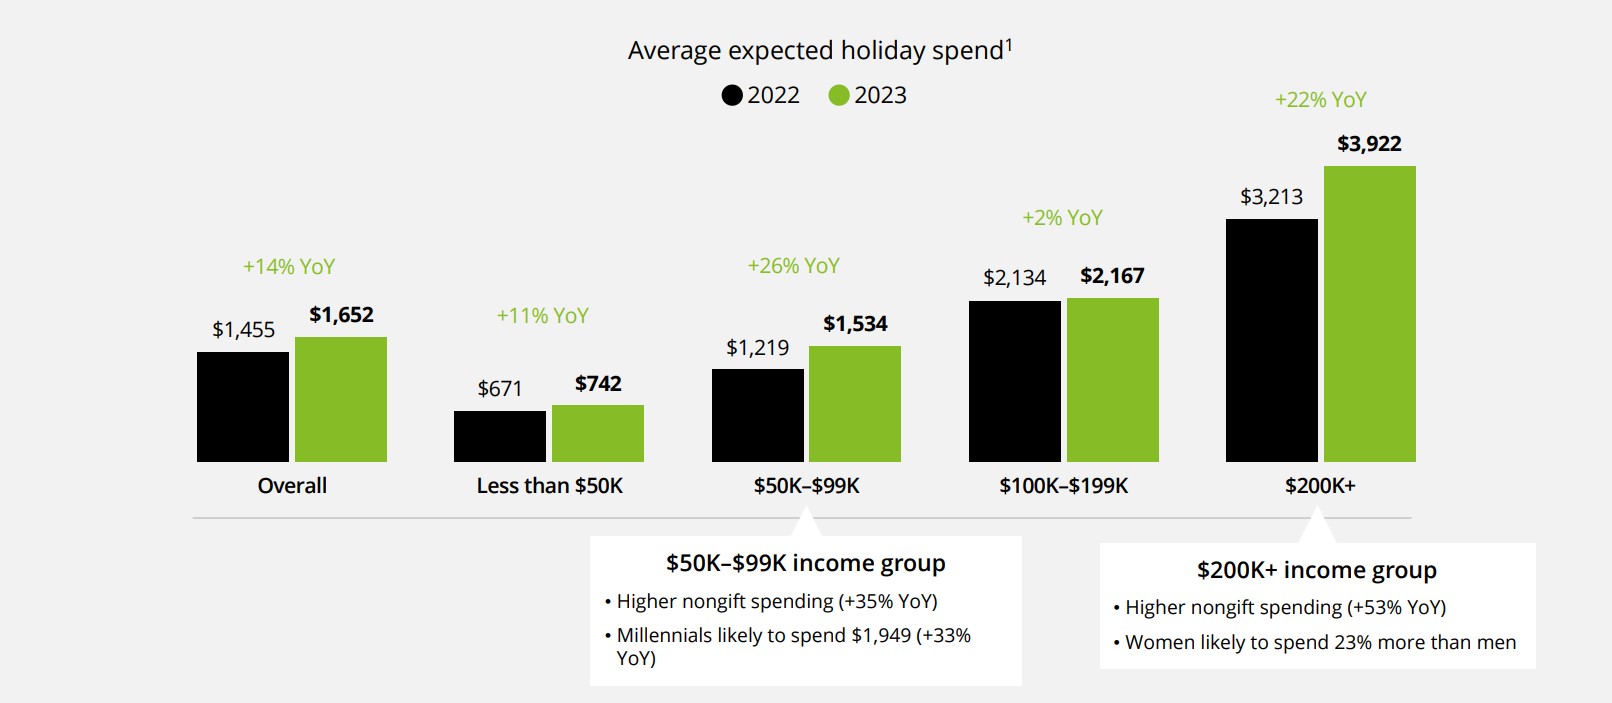 Graph showing the expected 2023 holiday spending compared to 2022 across income groups.